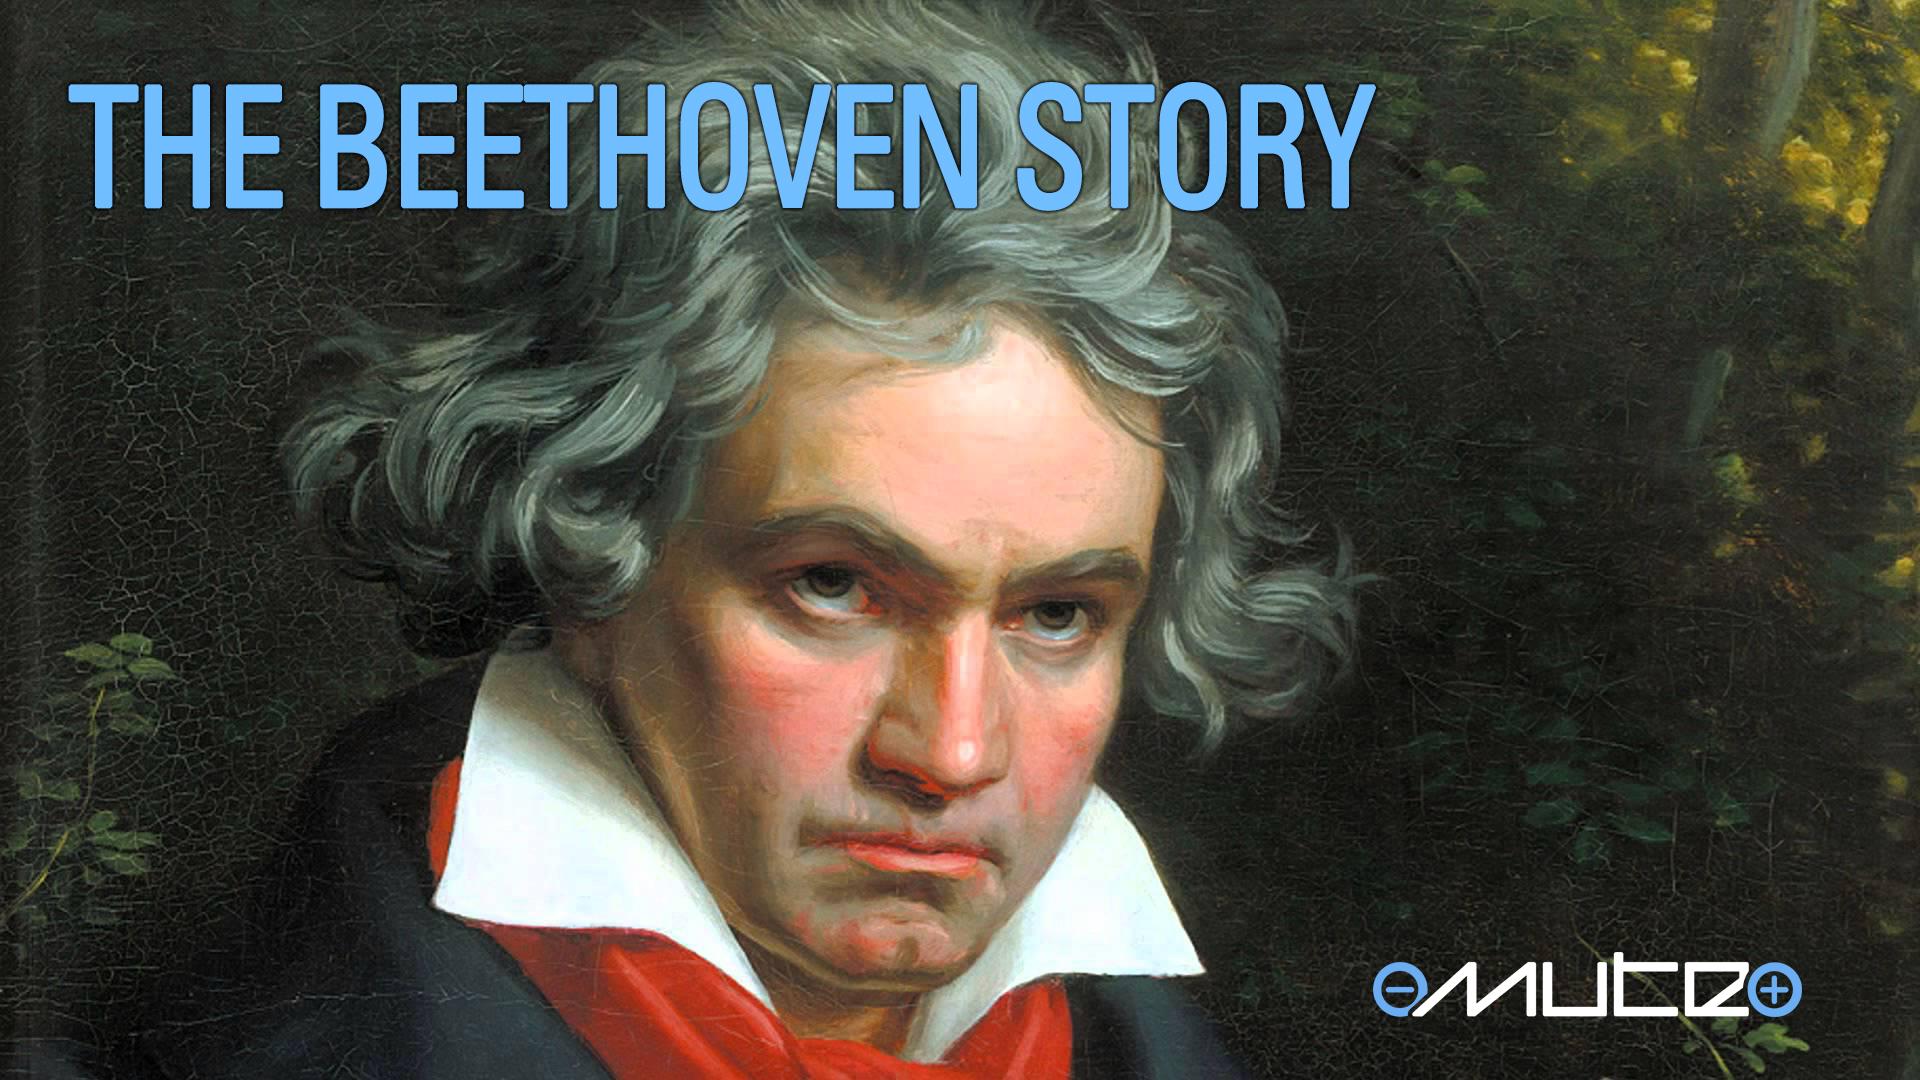 The Beethoven Story